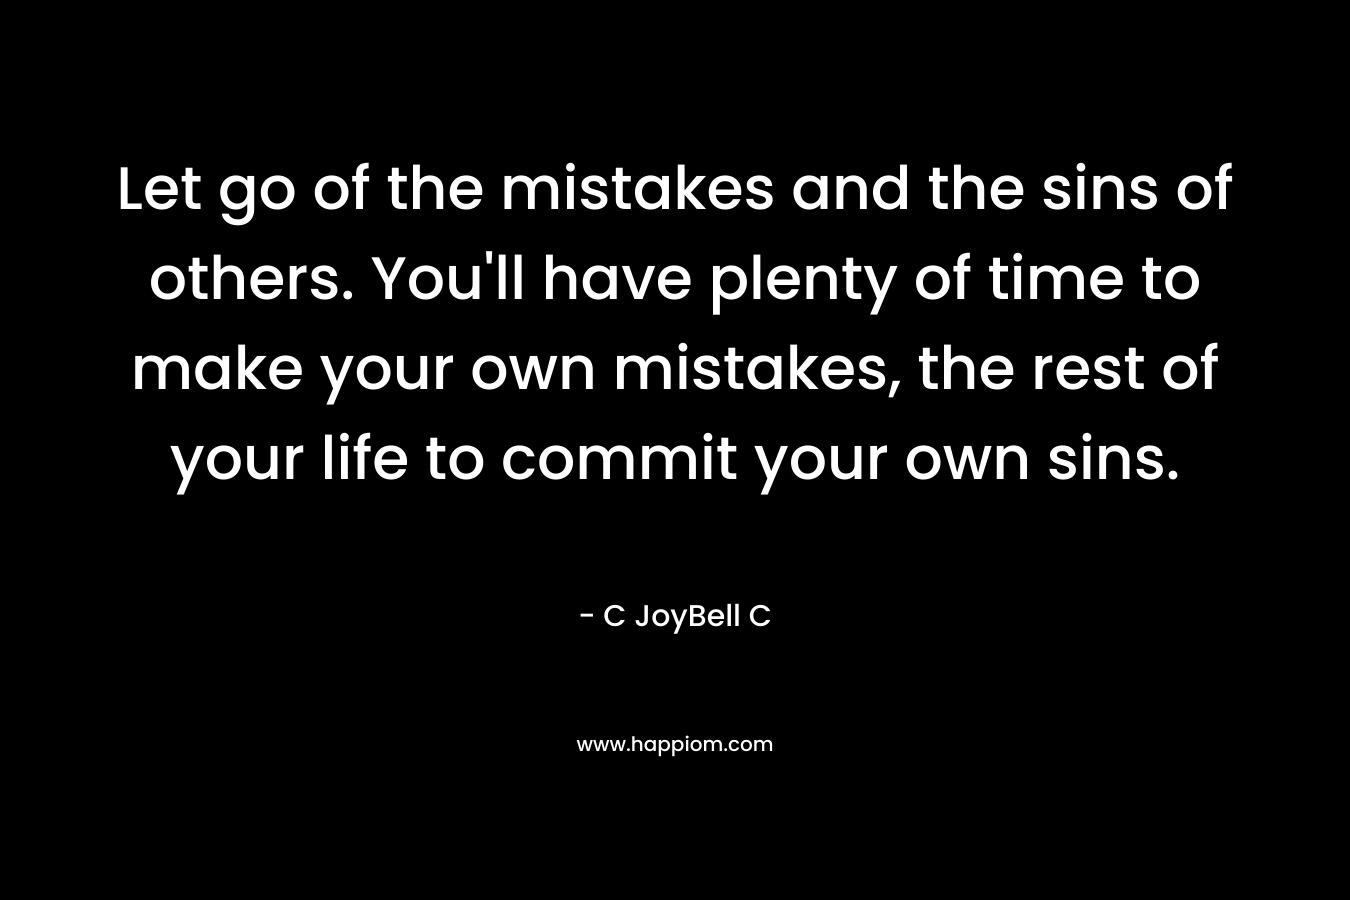 Let go of the mistakes and the sins of others. You'll have plenty of time to make your own mistakes, the rest of your life to commit your own sins.